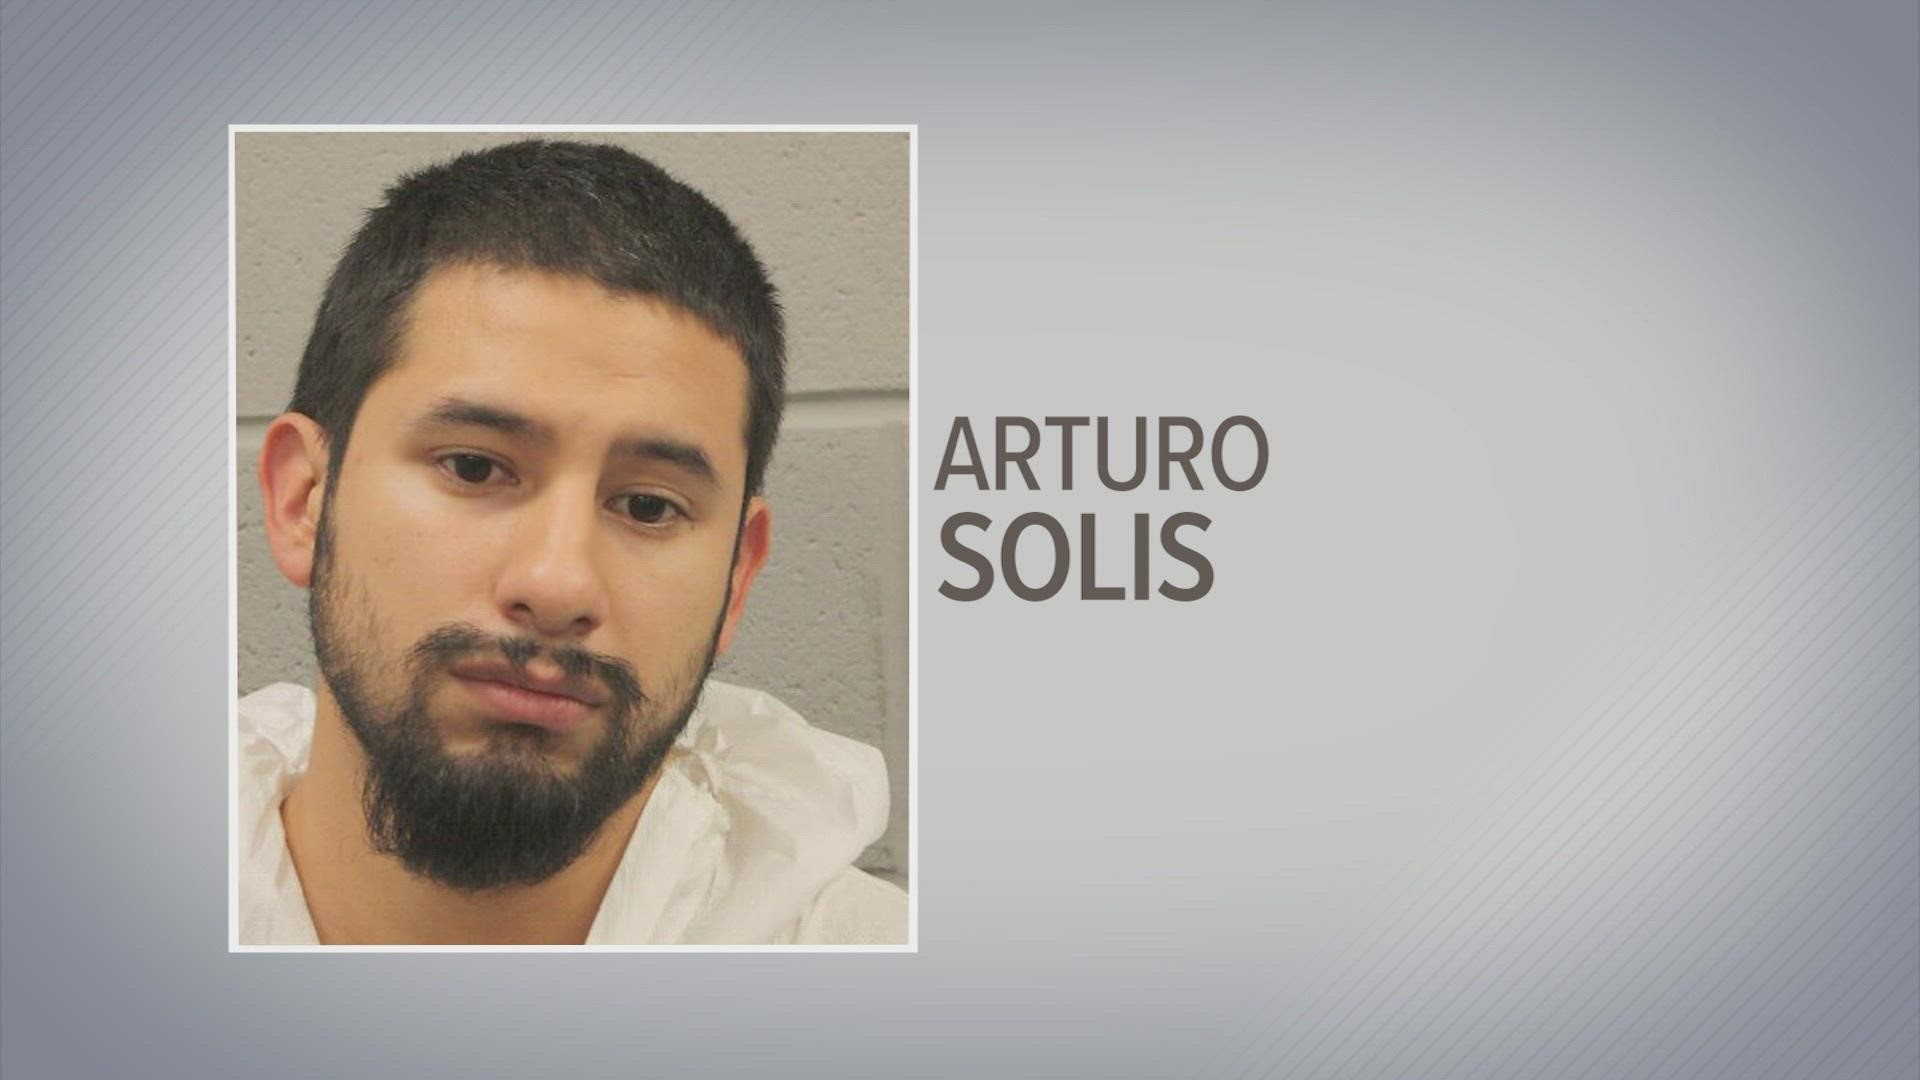 Arturo Solis, now 27, pleaded guilty to capital murder for the 2019 shooting death of 32-year-old Sgt. Christopher Brewster.